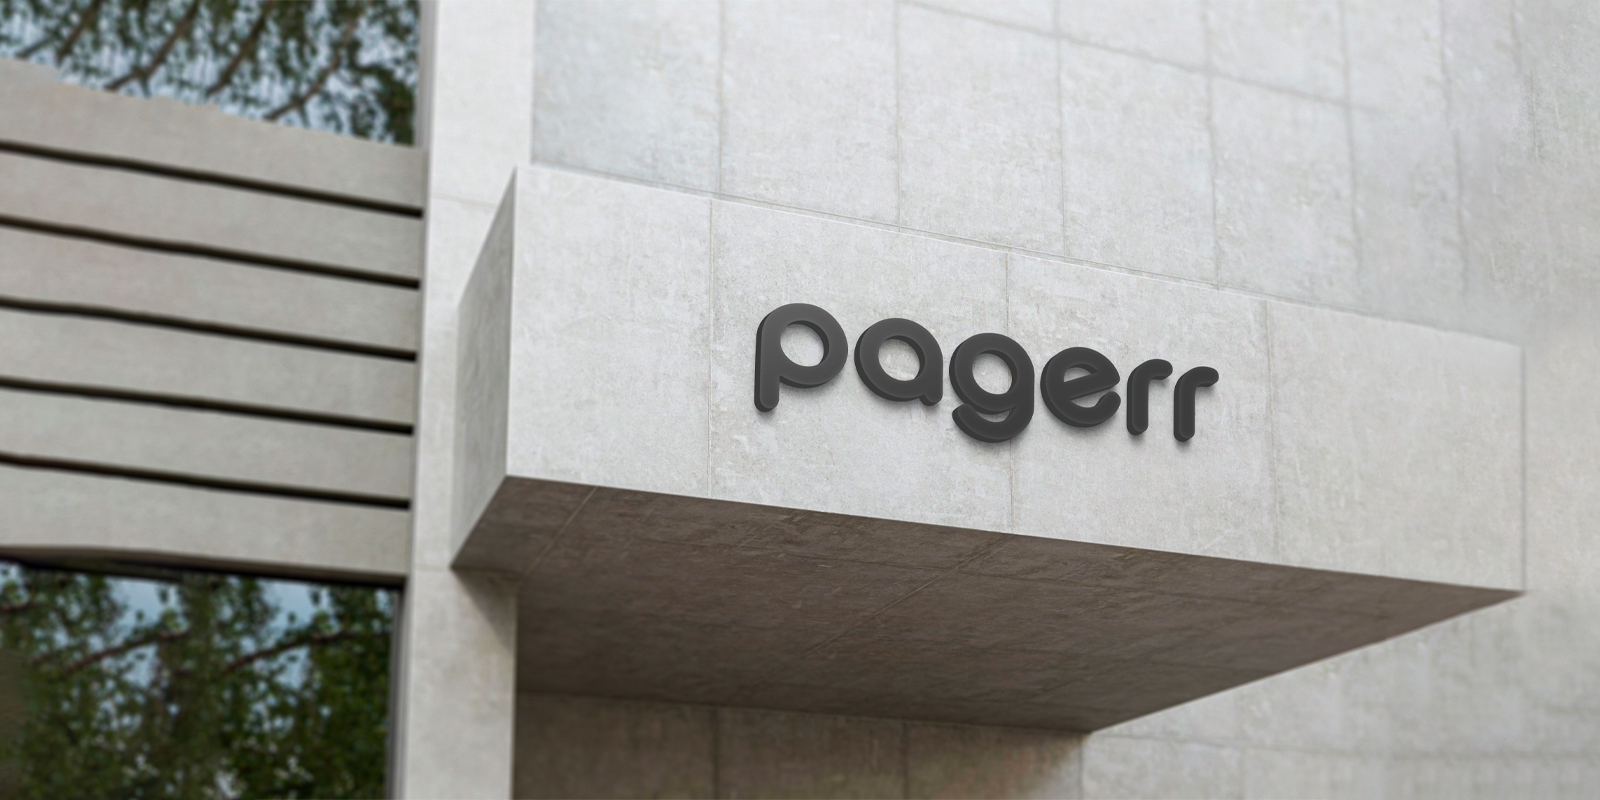 Logo signs in Warsaw - Print with Pagerr